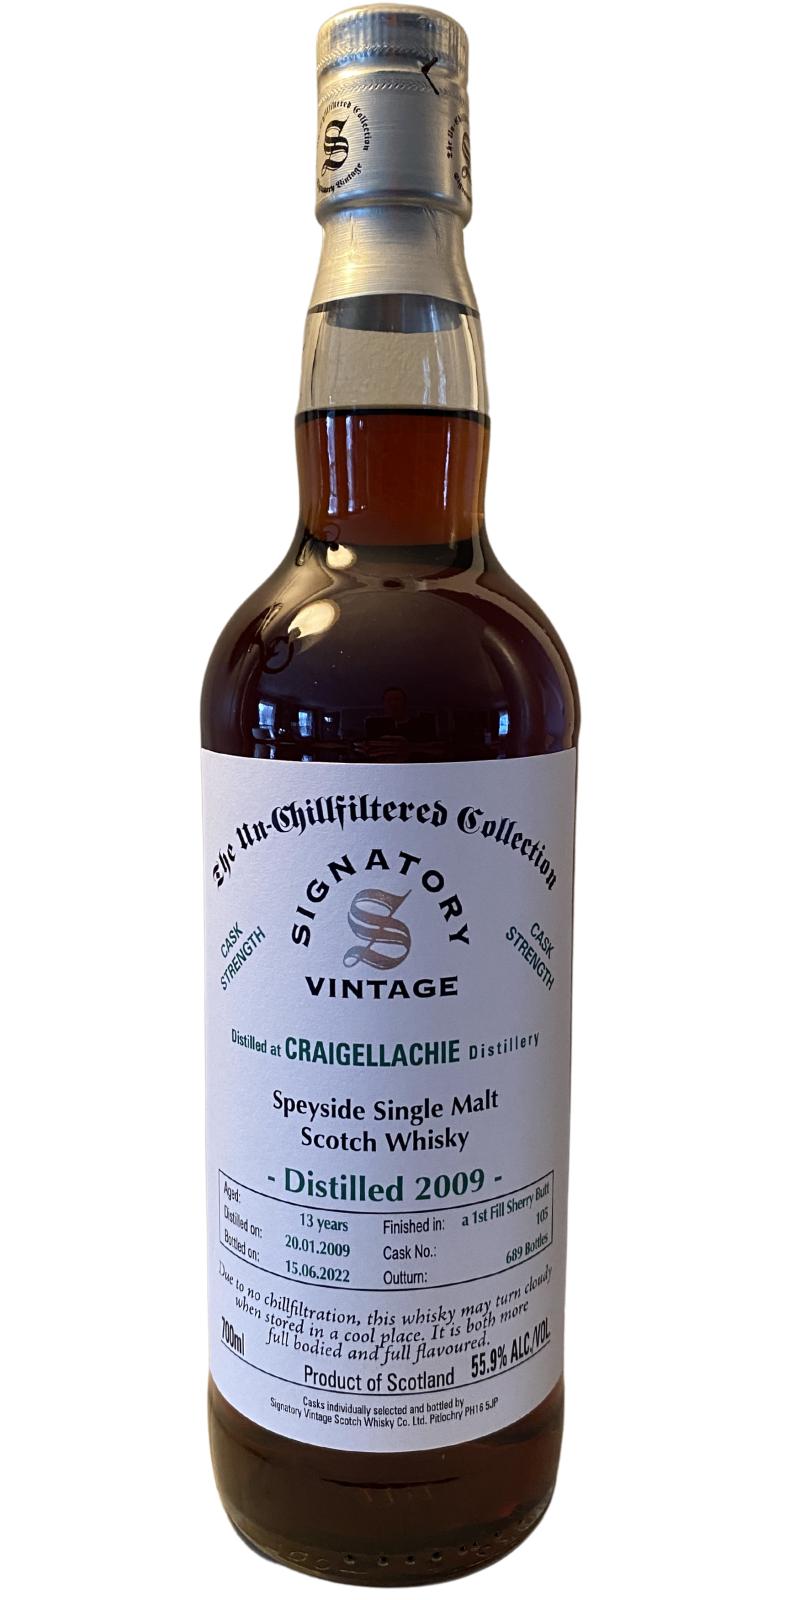 Craigellachie 2009 SV The Un-Chillfiltered Collection Cask Strength 1st Fill Sherry Butt 55.9% 700ml